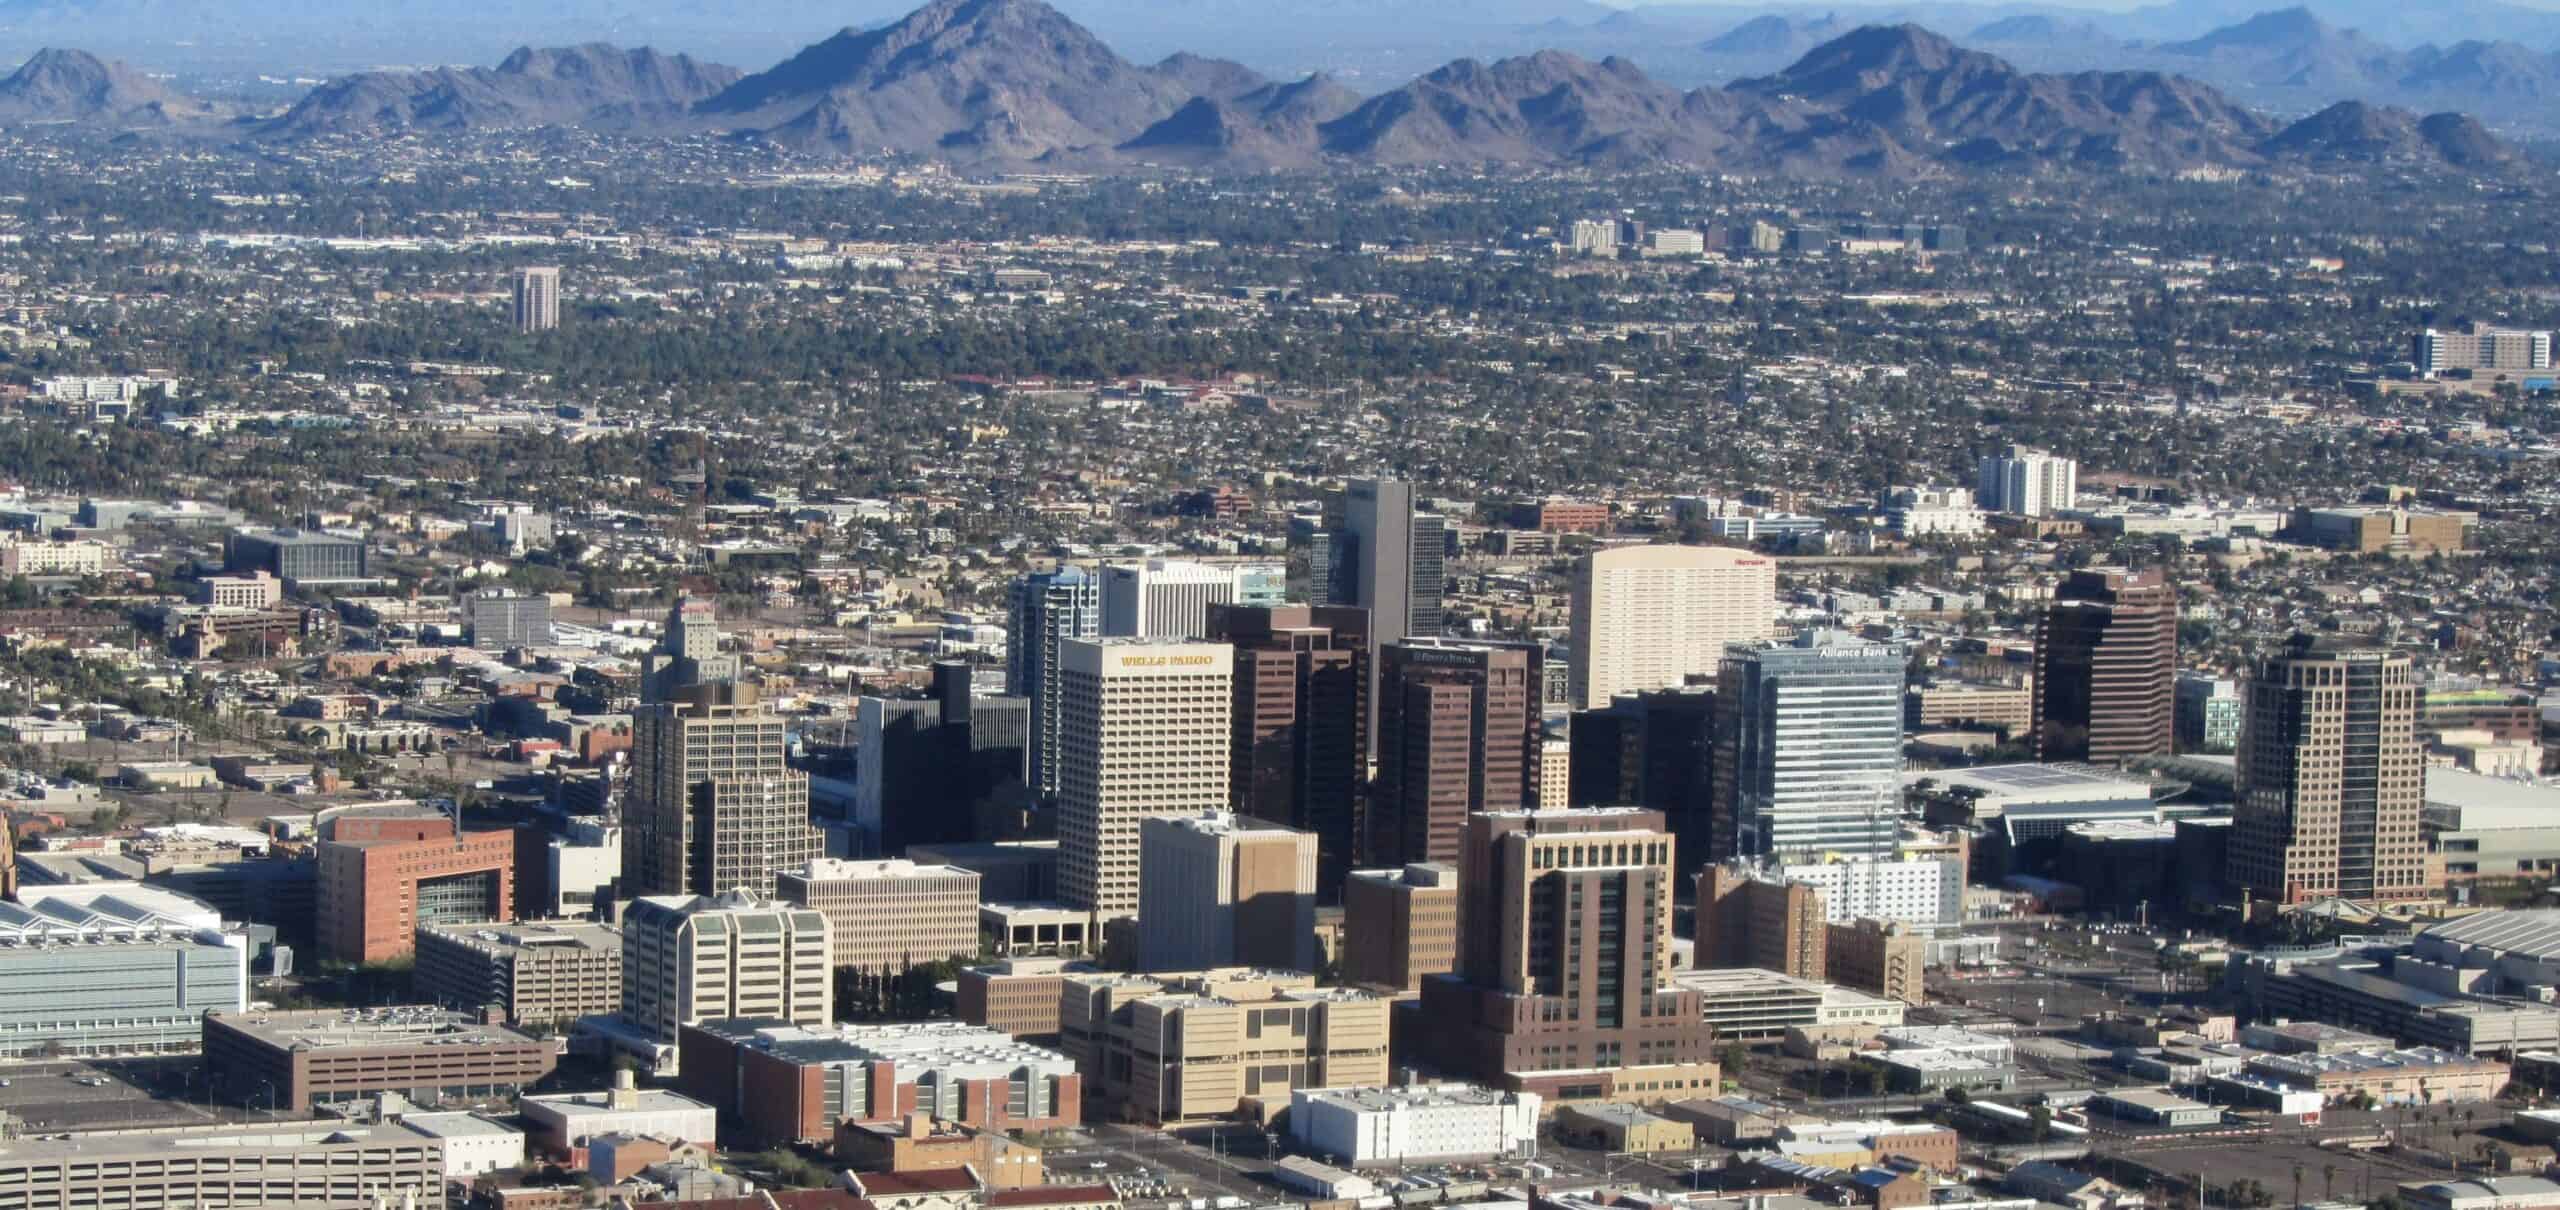 downtown phoenix from the sky